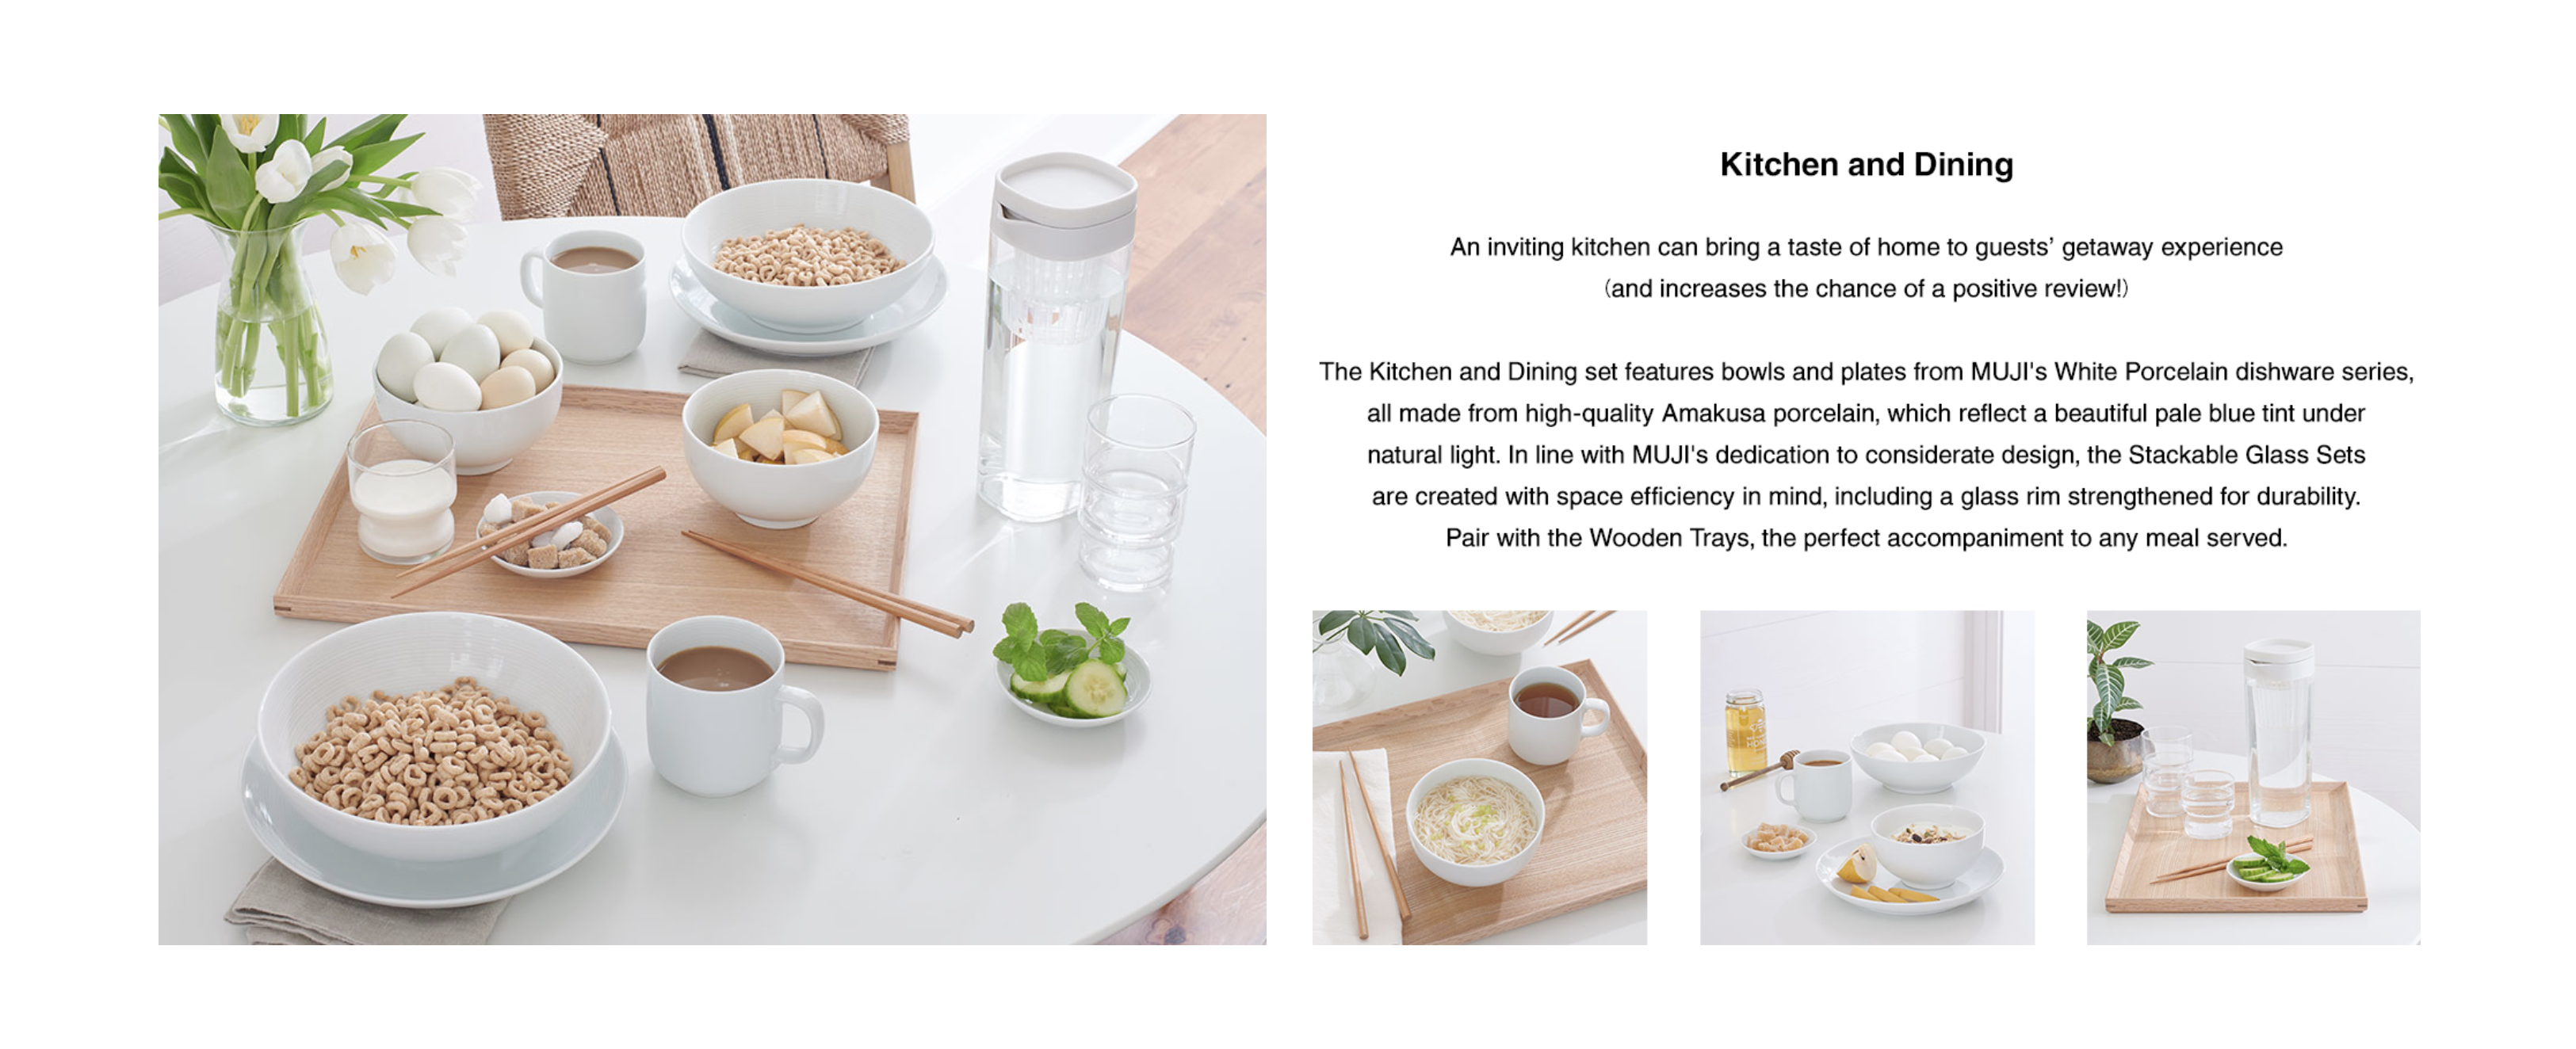 Air bnb and muji ad with food by Alison Gootee Photography